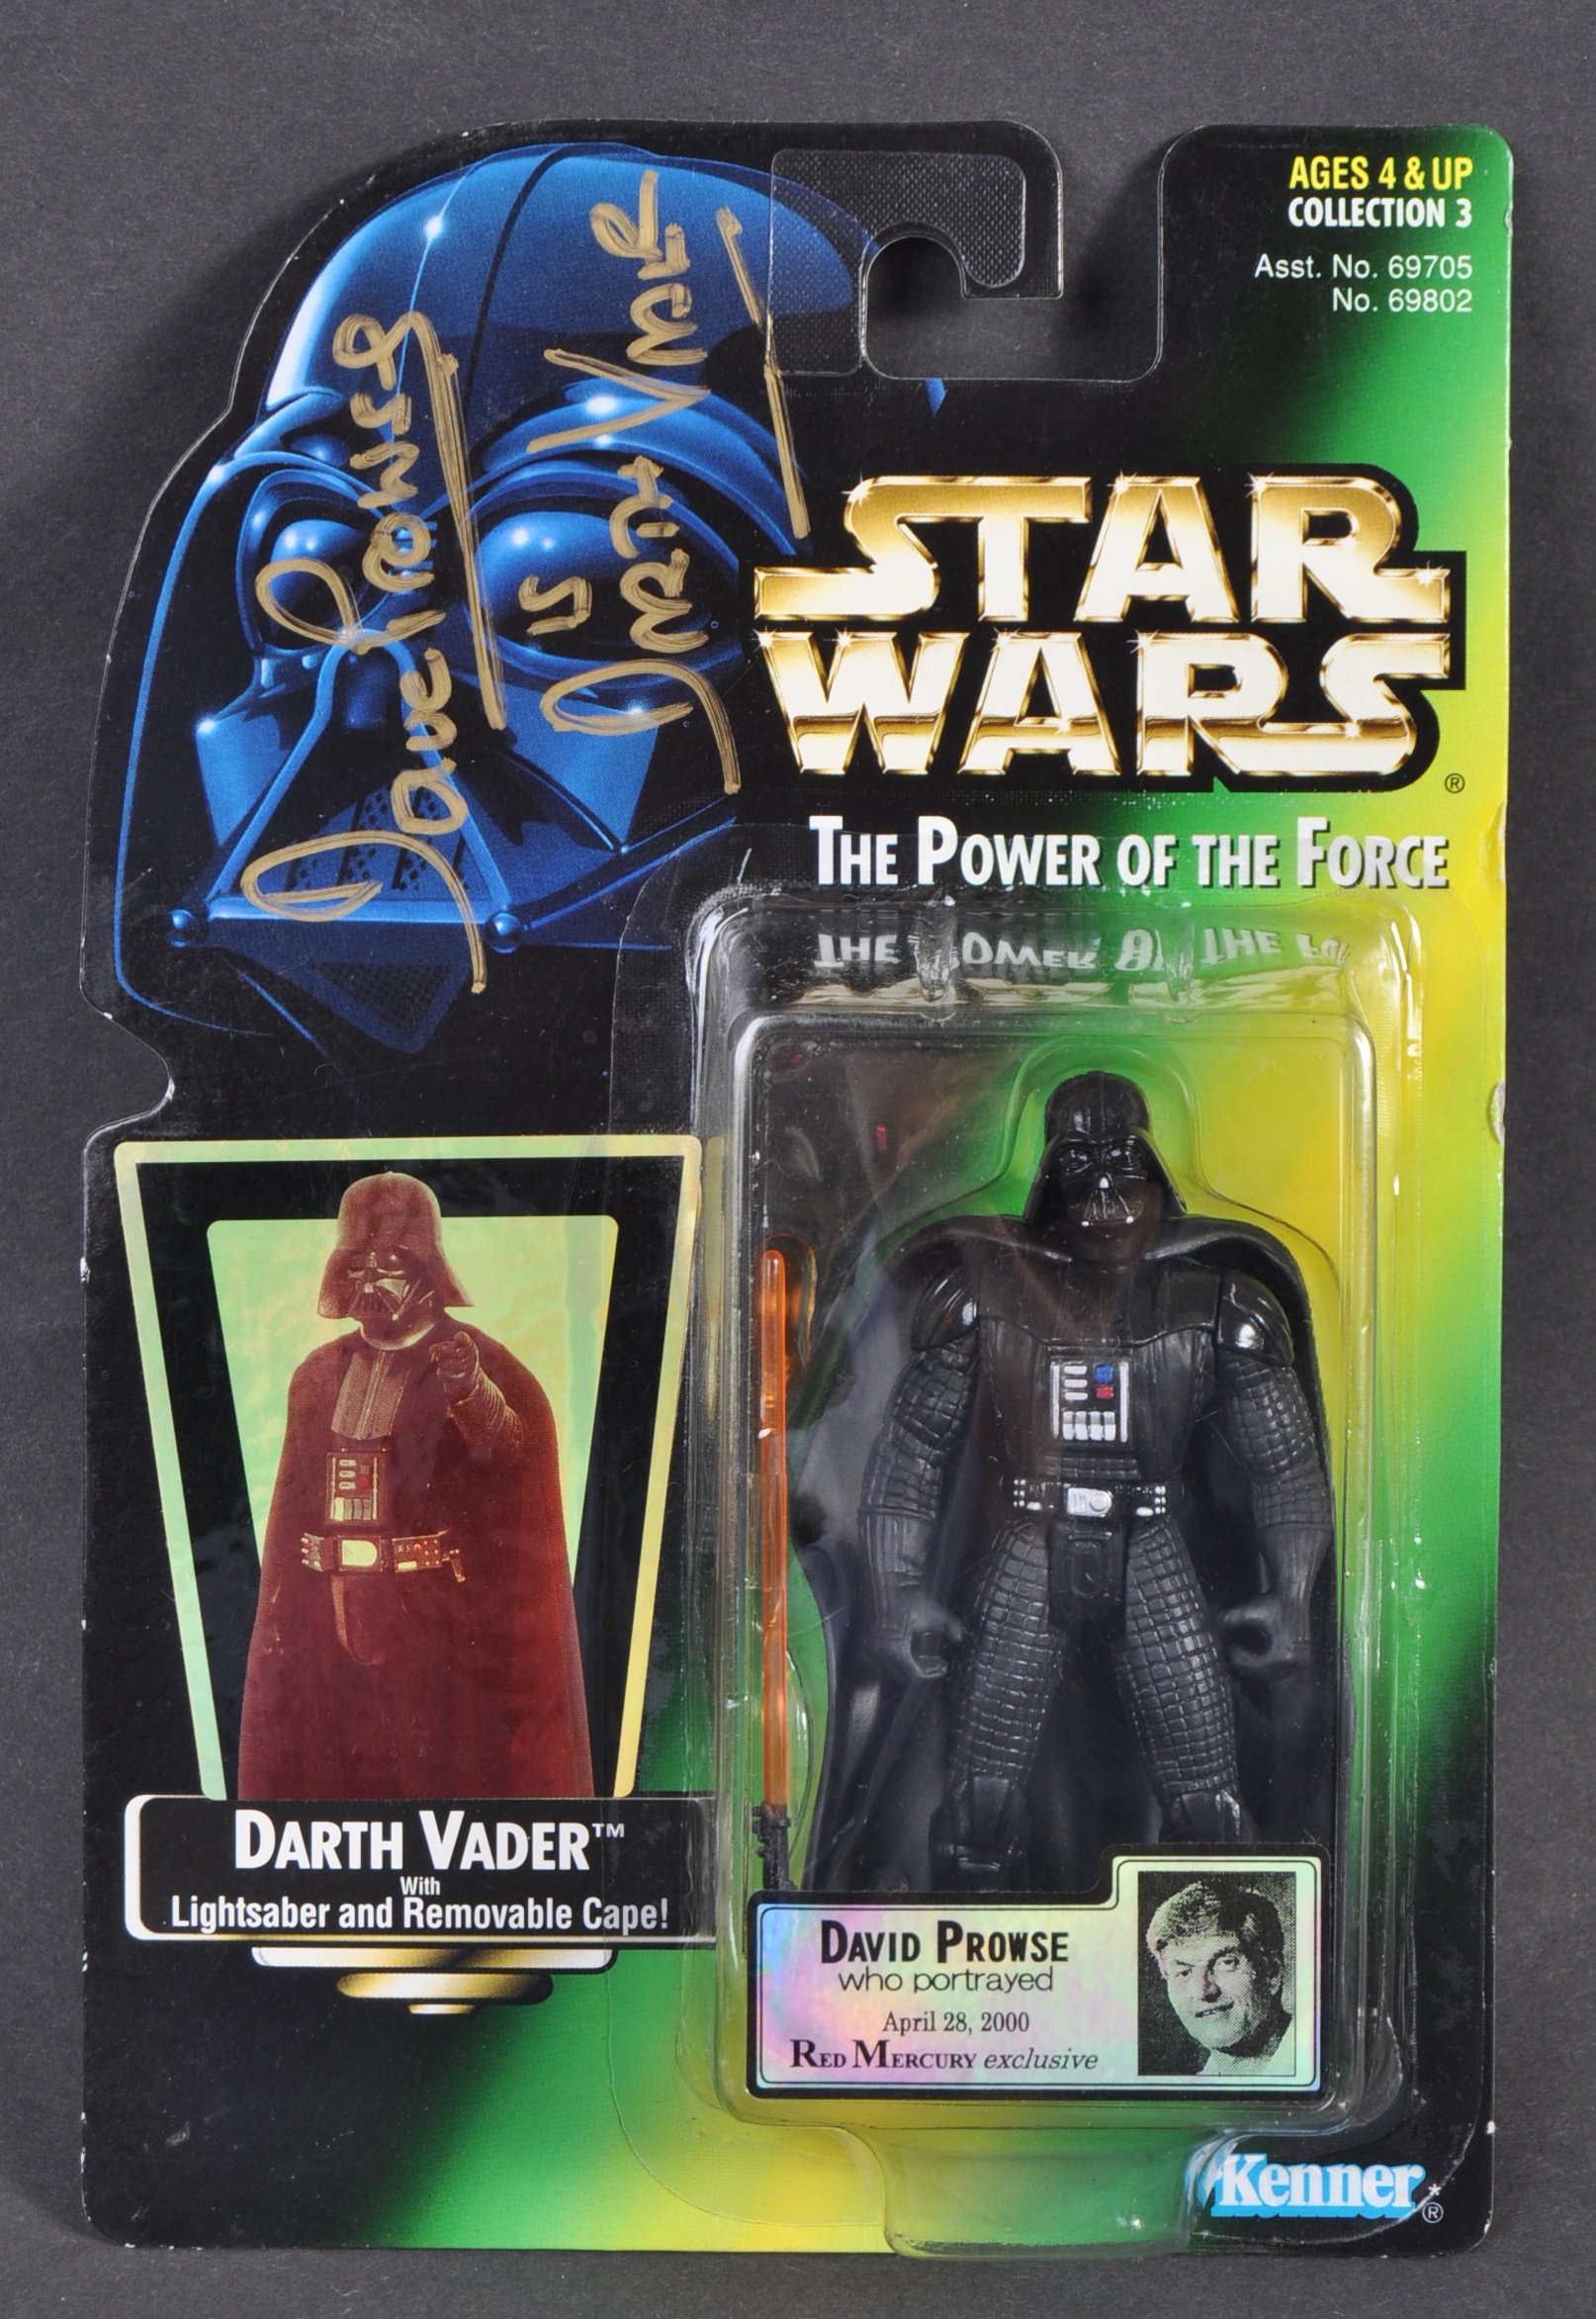 ESTATE OF DAVE PROWSE - RARE LIMITED EDITION SIGNED KENNER FIGURE